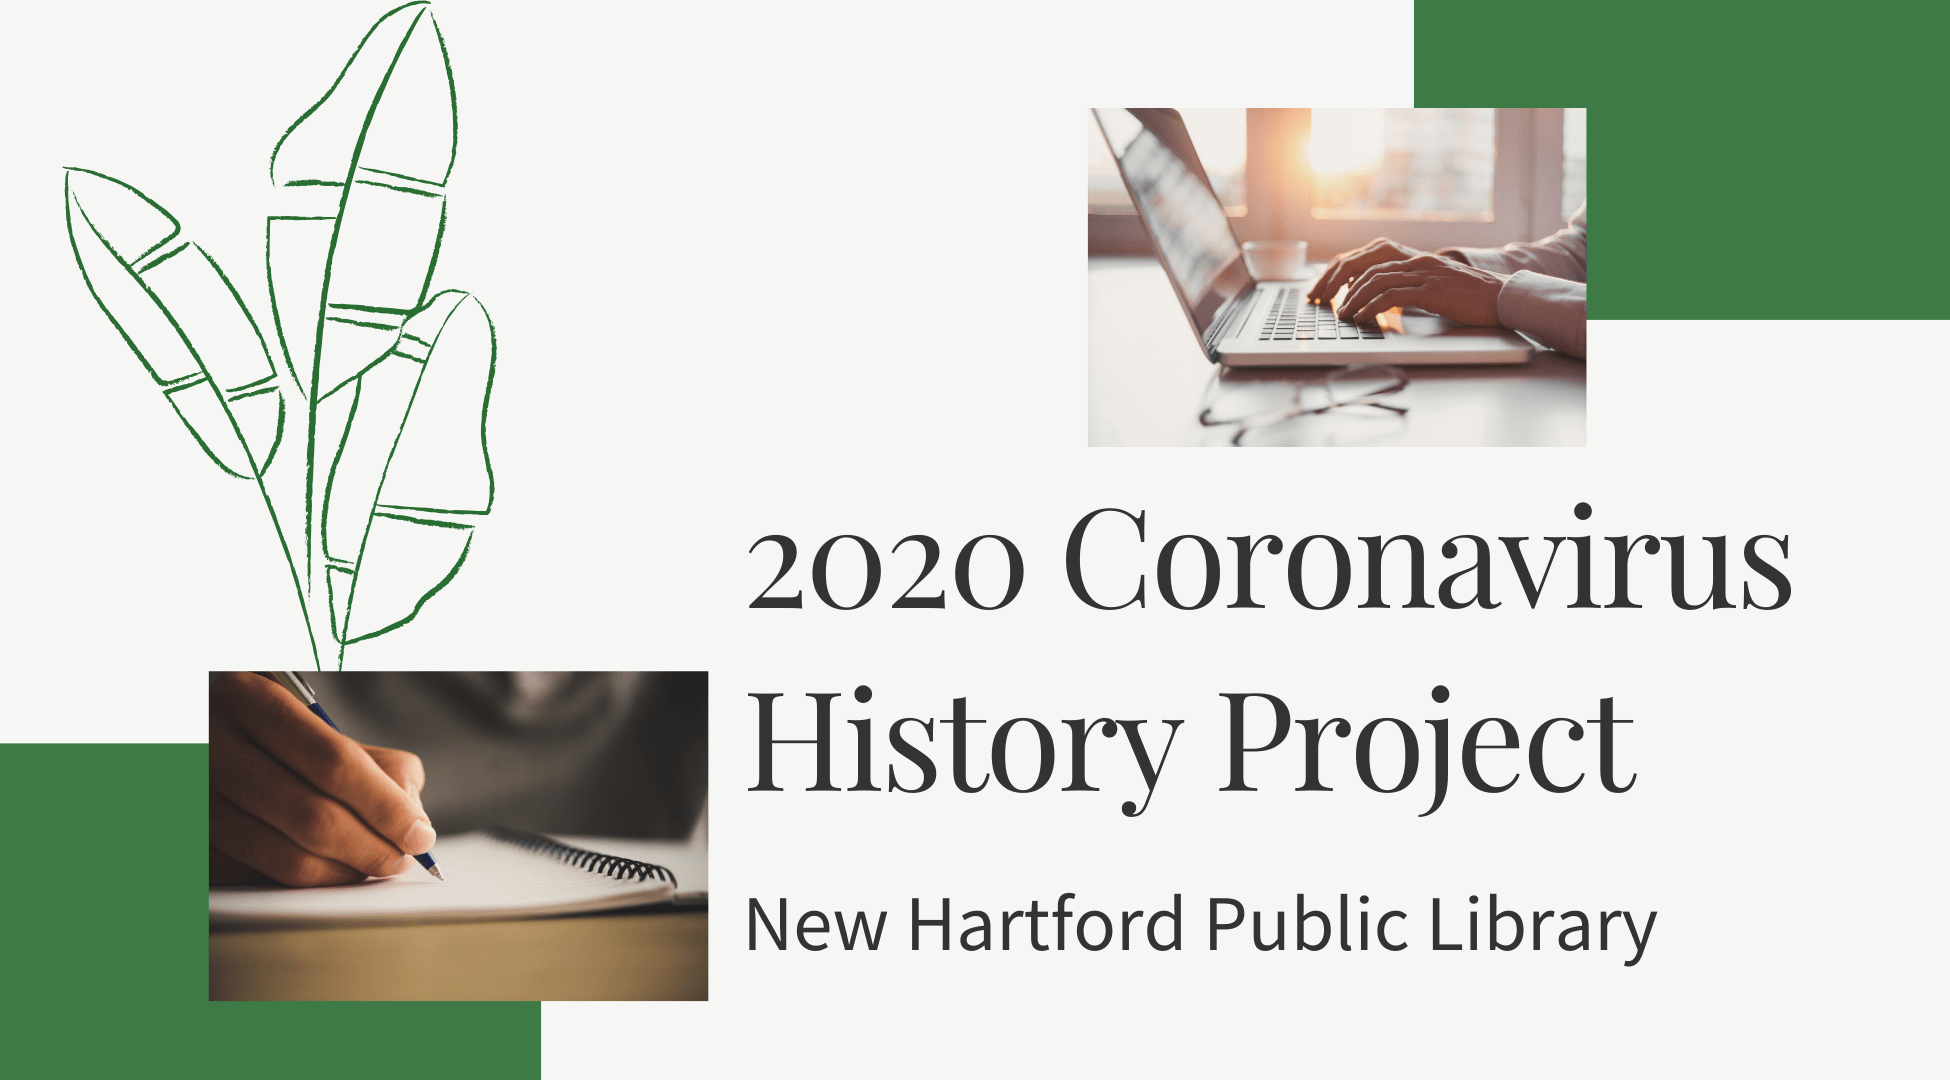 What is the 2020 Coronavirus History Project?